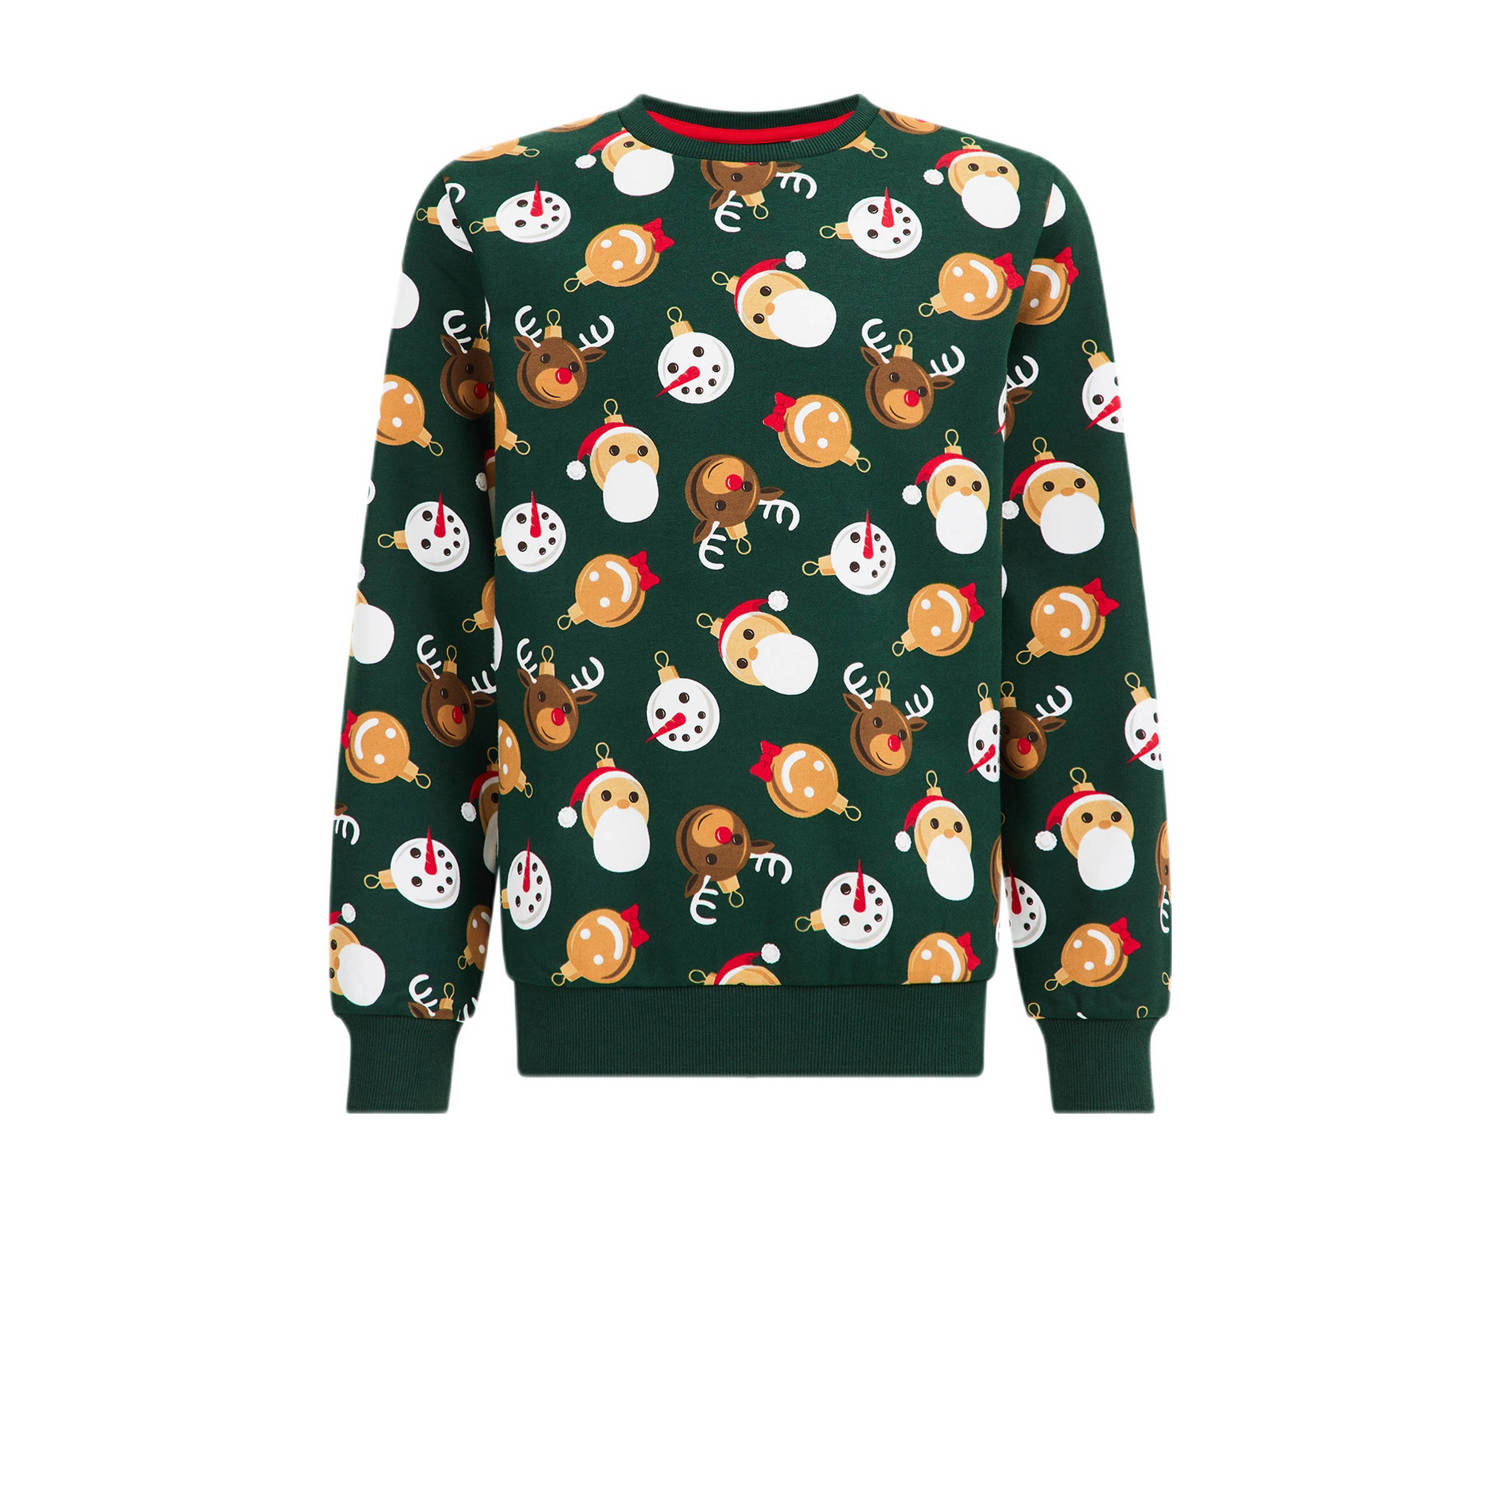 WE Fashion kerstsweater met all over print groen beige rood All over print 110 116